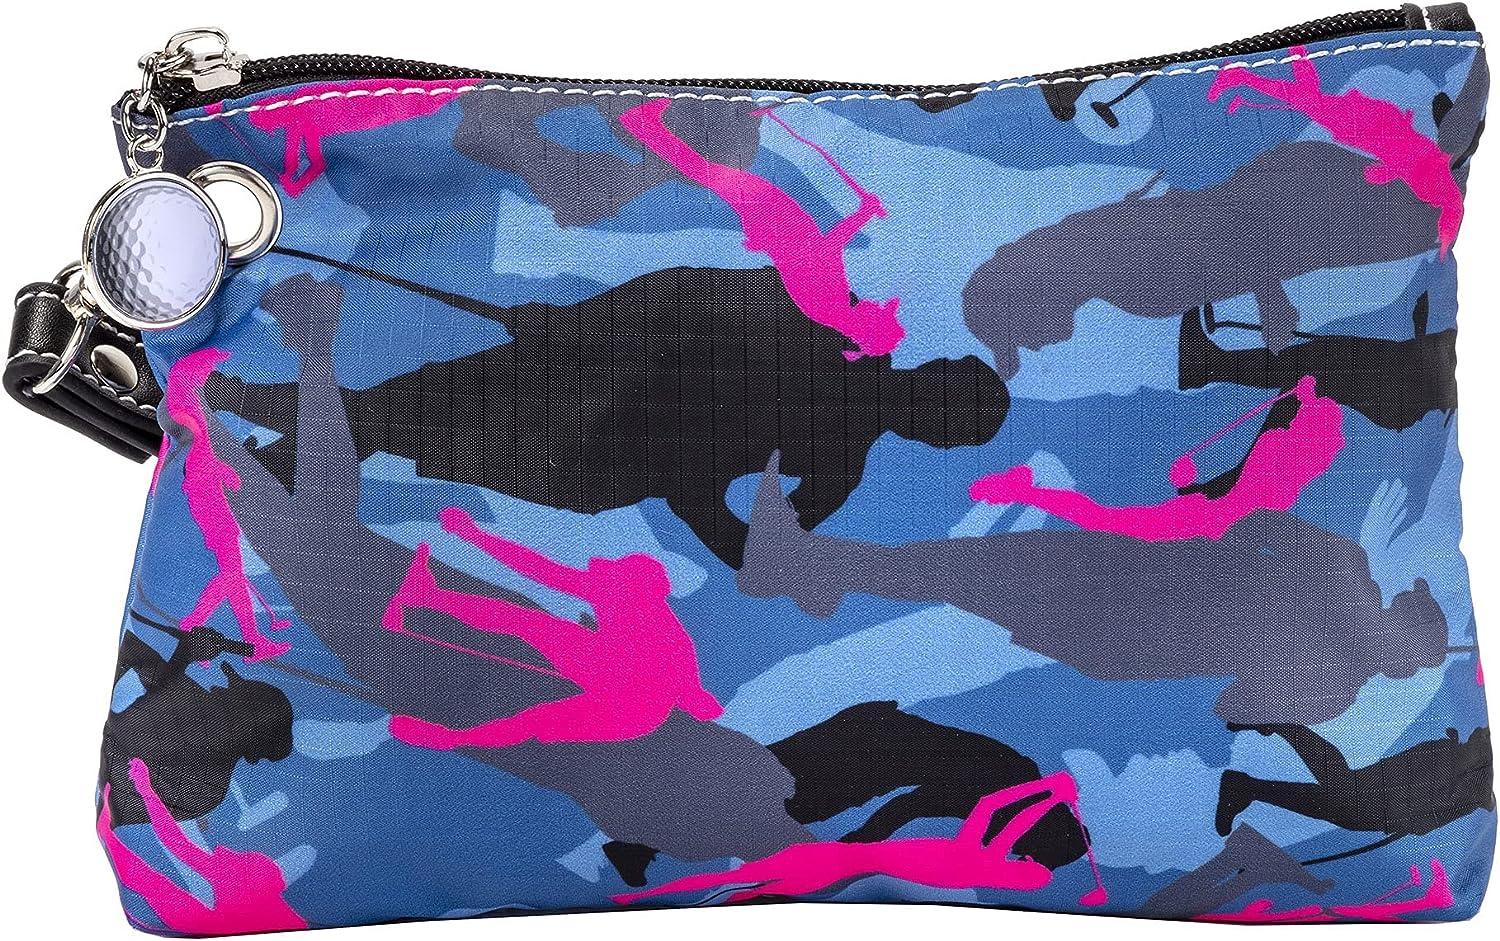 Sydney Love Lady Golf Cosmetic Bag (Blue Camouflage) : Beauty & Personal  Care - Amazon.com